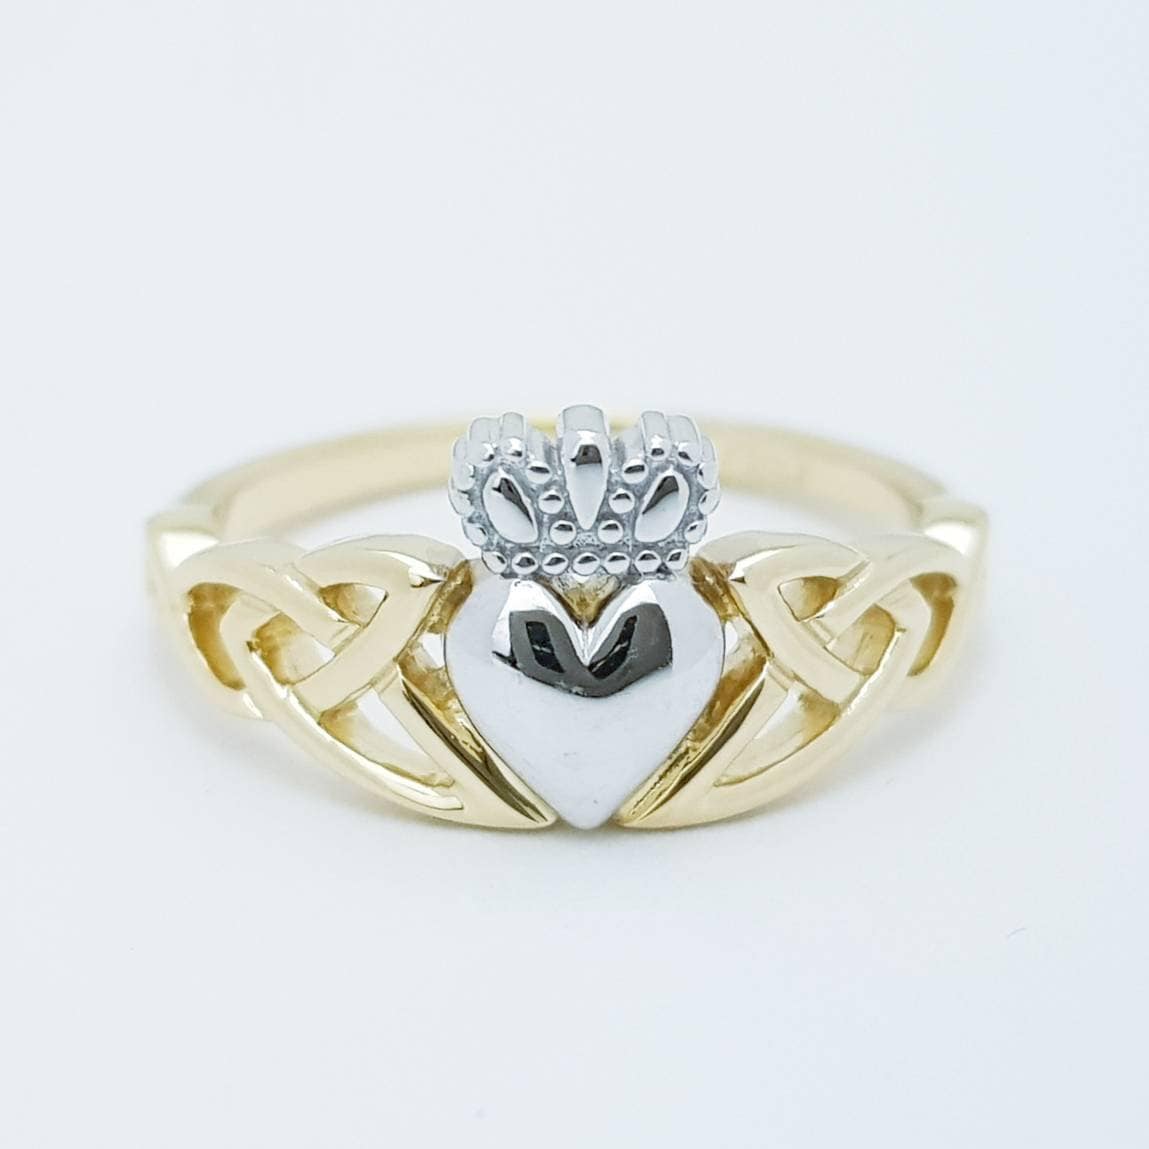 Sterling Silver Claddagh ring, gold celtic Knot Claddagh Ring, Irish heart and hands Ring